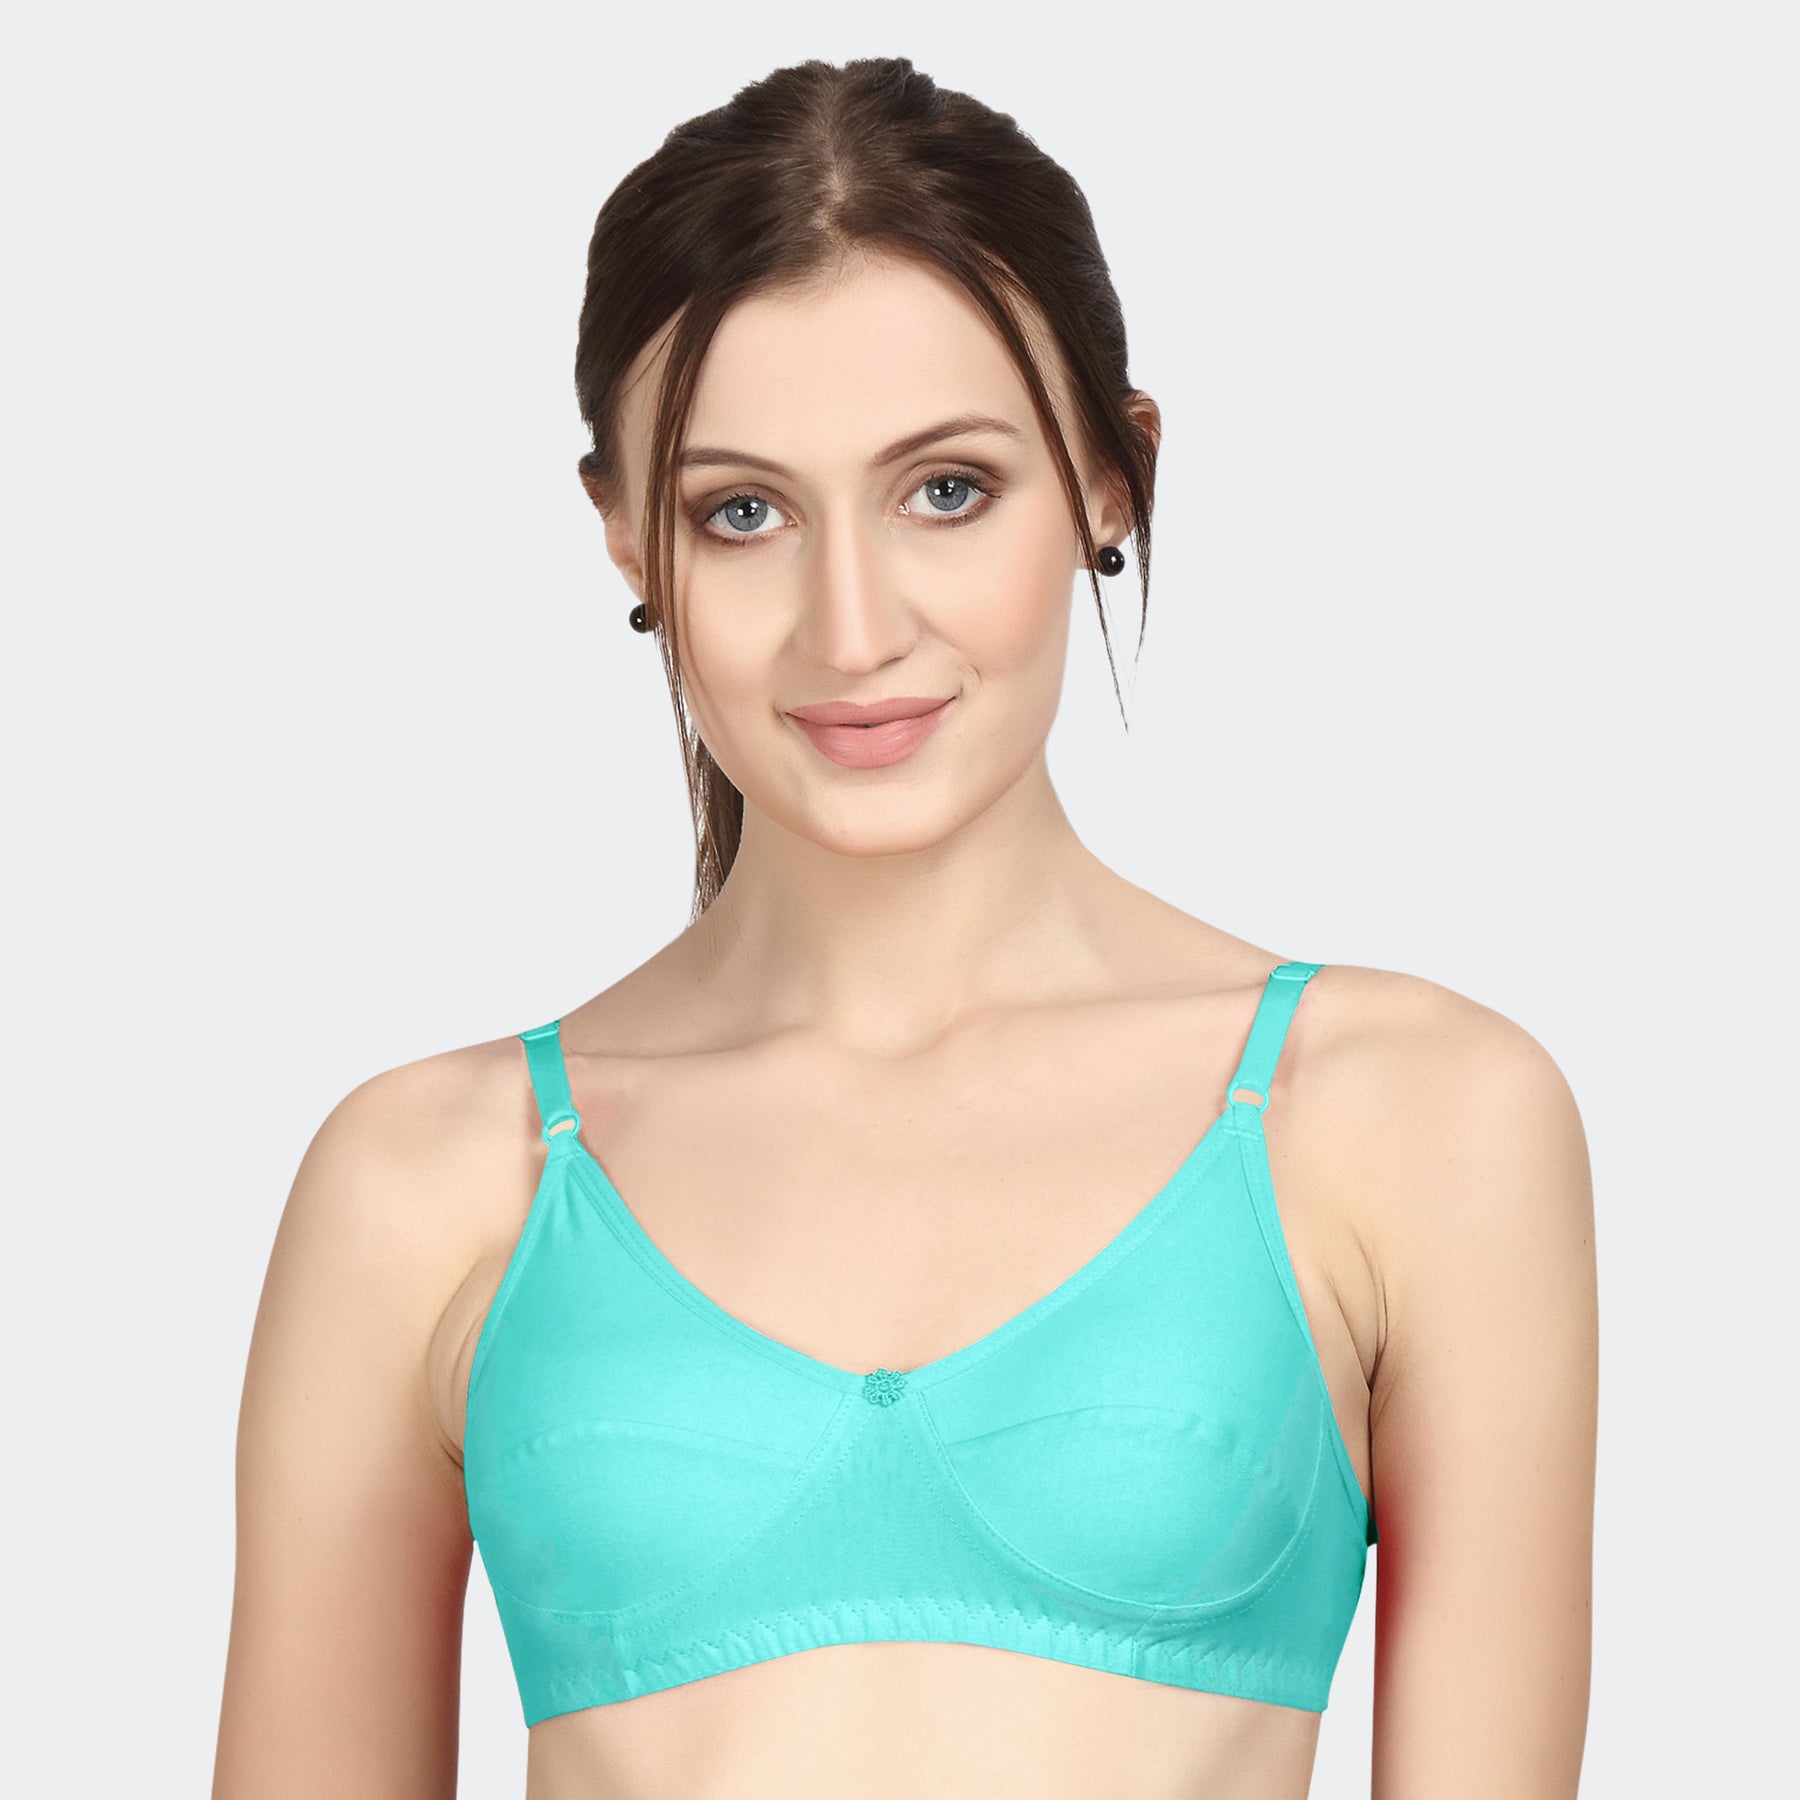 PRITHVI INNER WEARS Prency bra Pack Of 2 Color M.BLUE And WINE